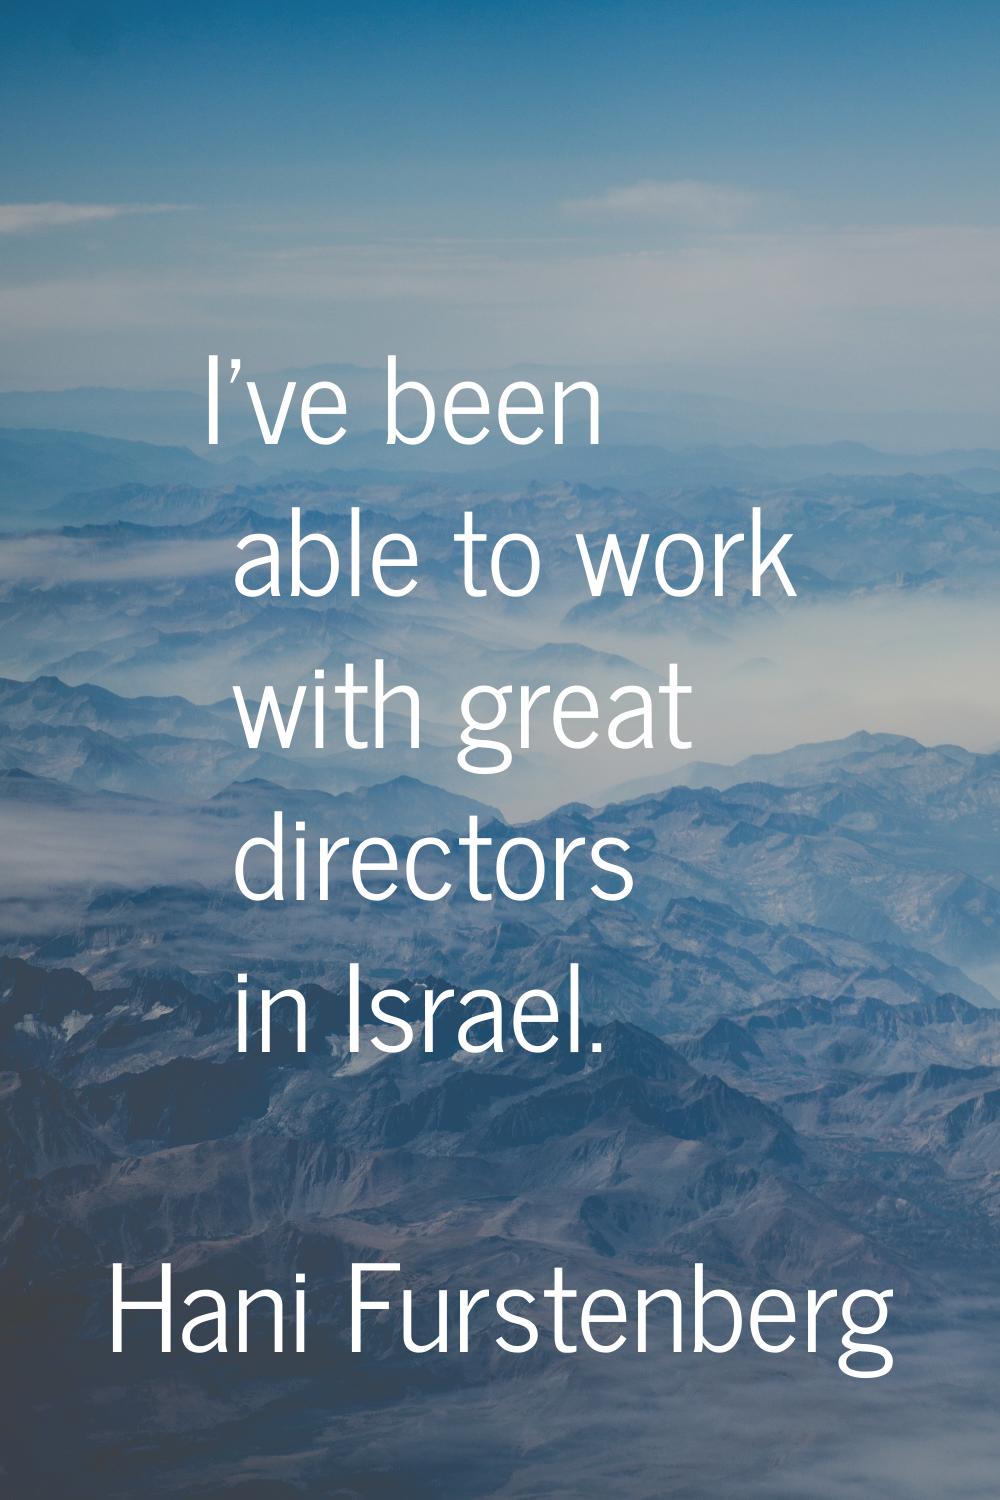 I've been able to work with great directors in Israel.